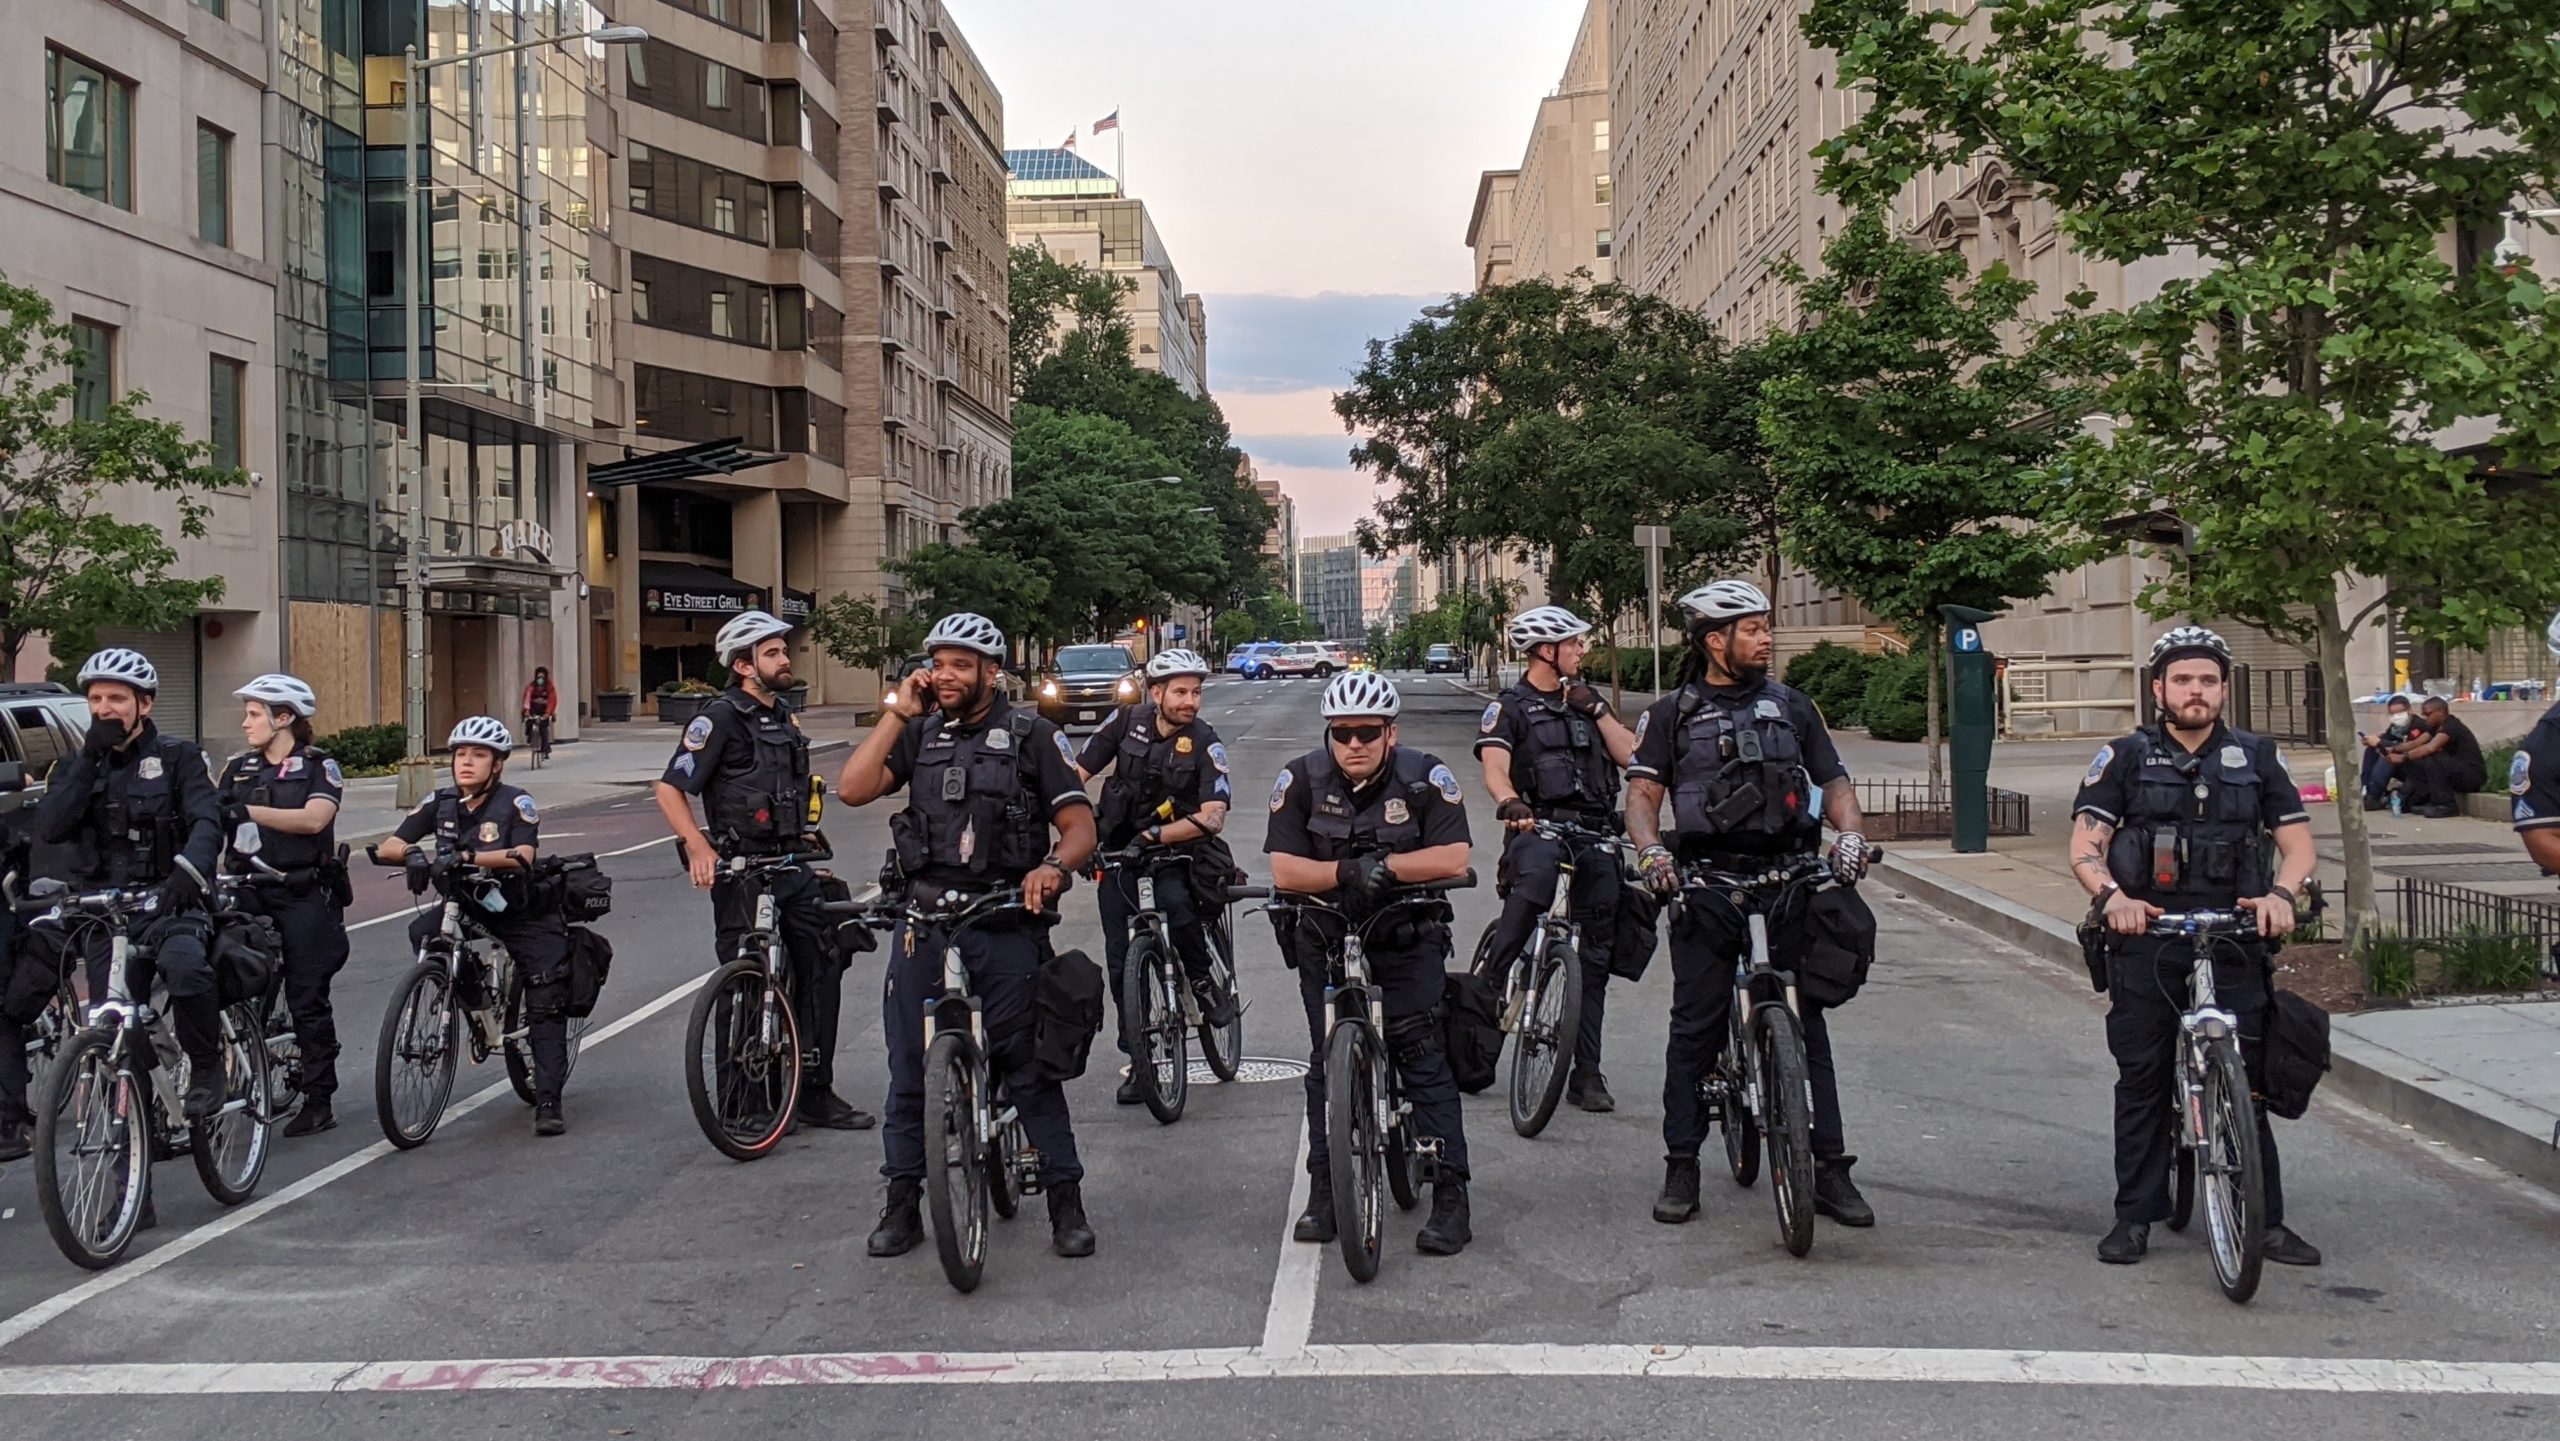 D.C. Metropolitan Police Department officers on bicycles on June 2. (Photo: Tom McKay, Gizmodo)